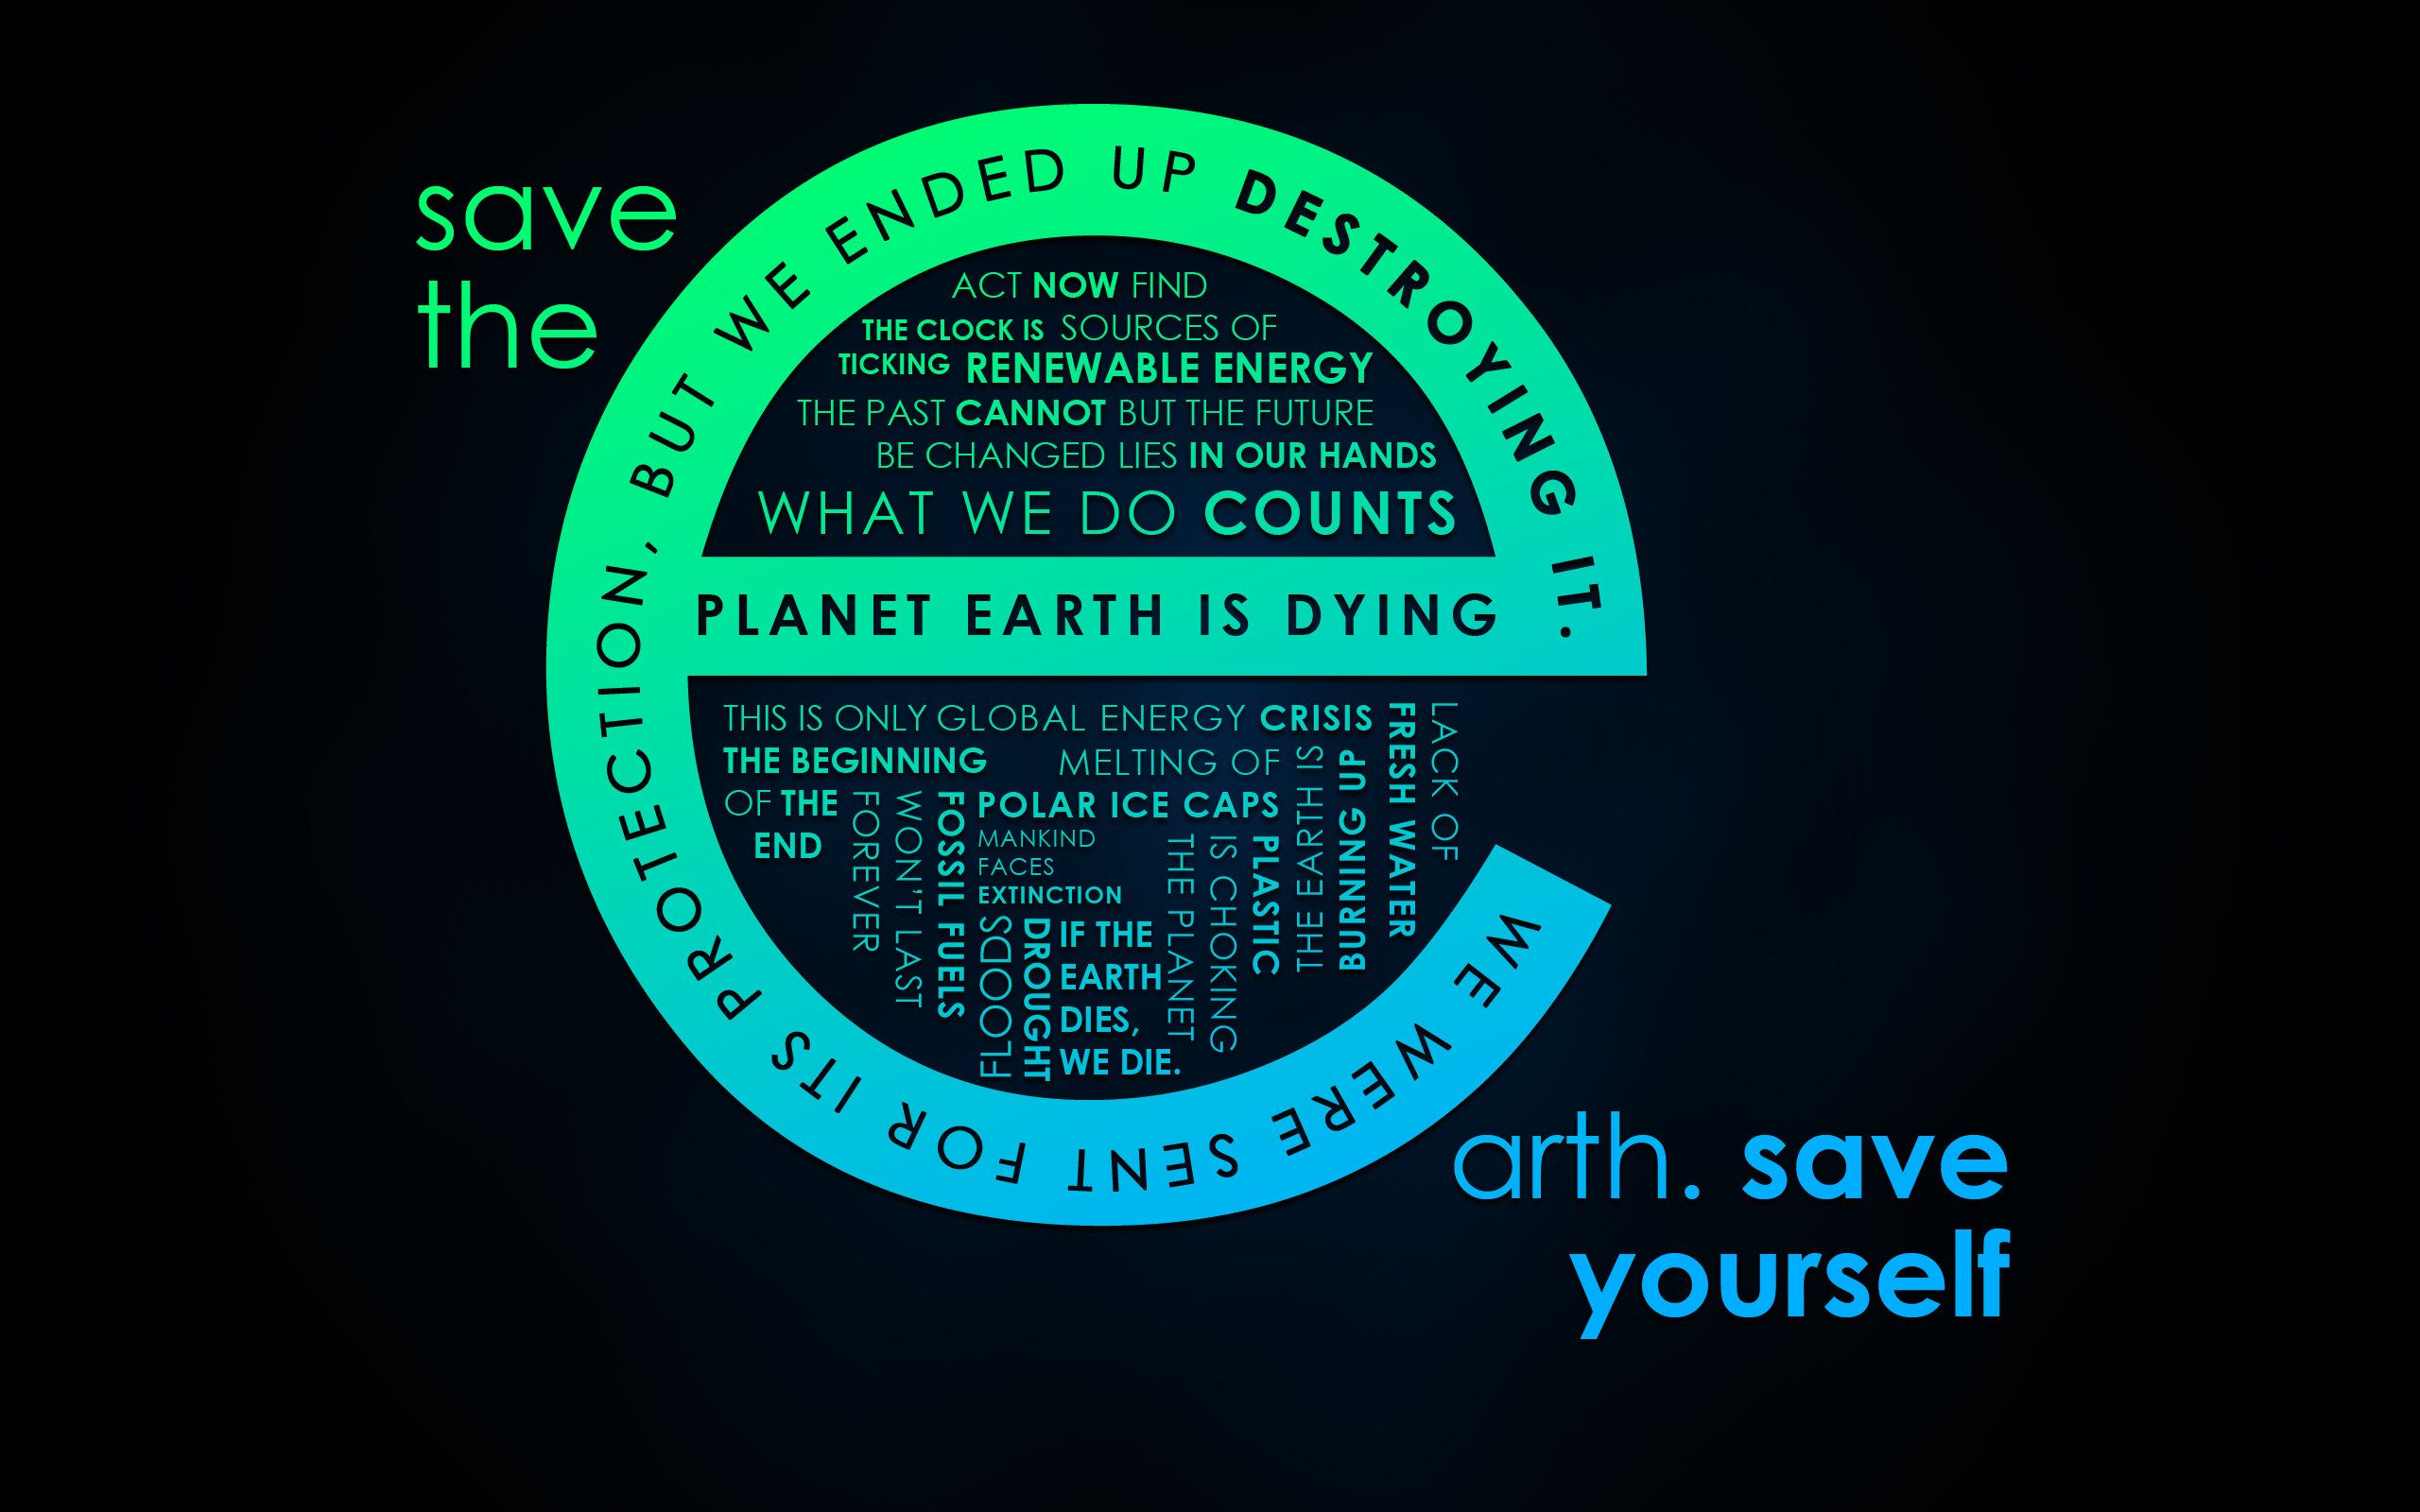 Save the earth wallpaperx1600